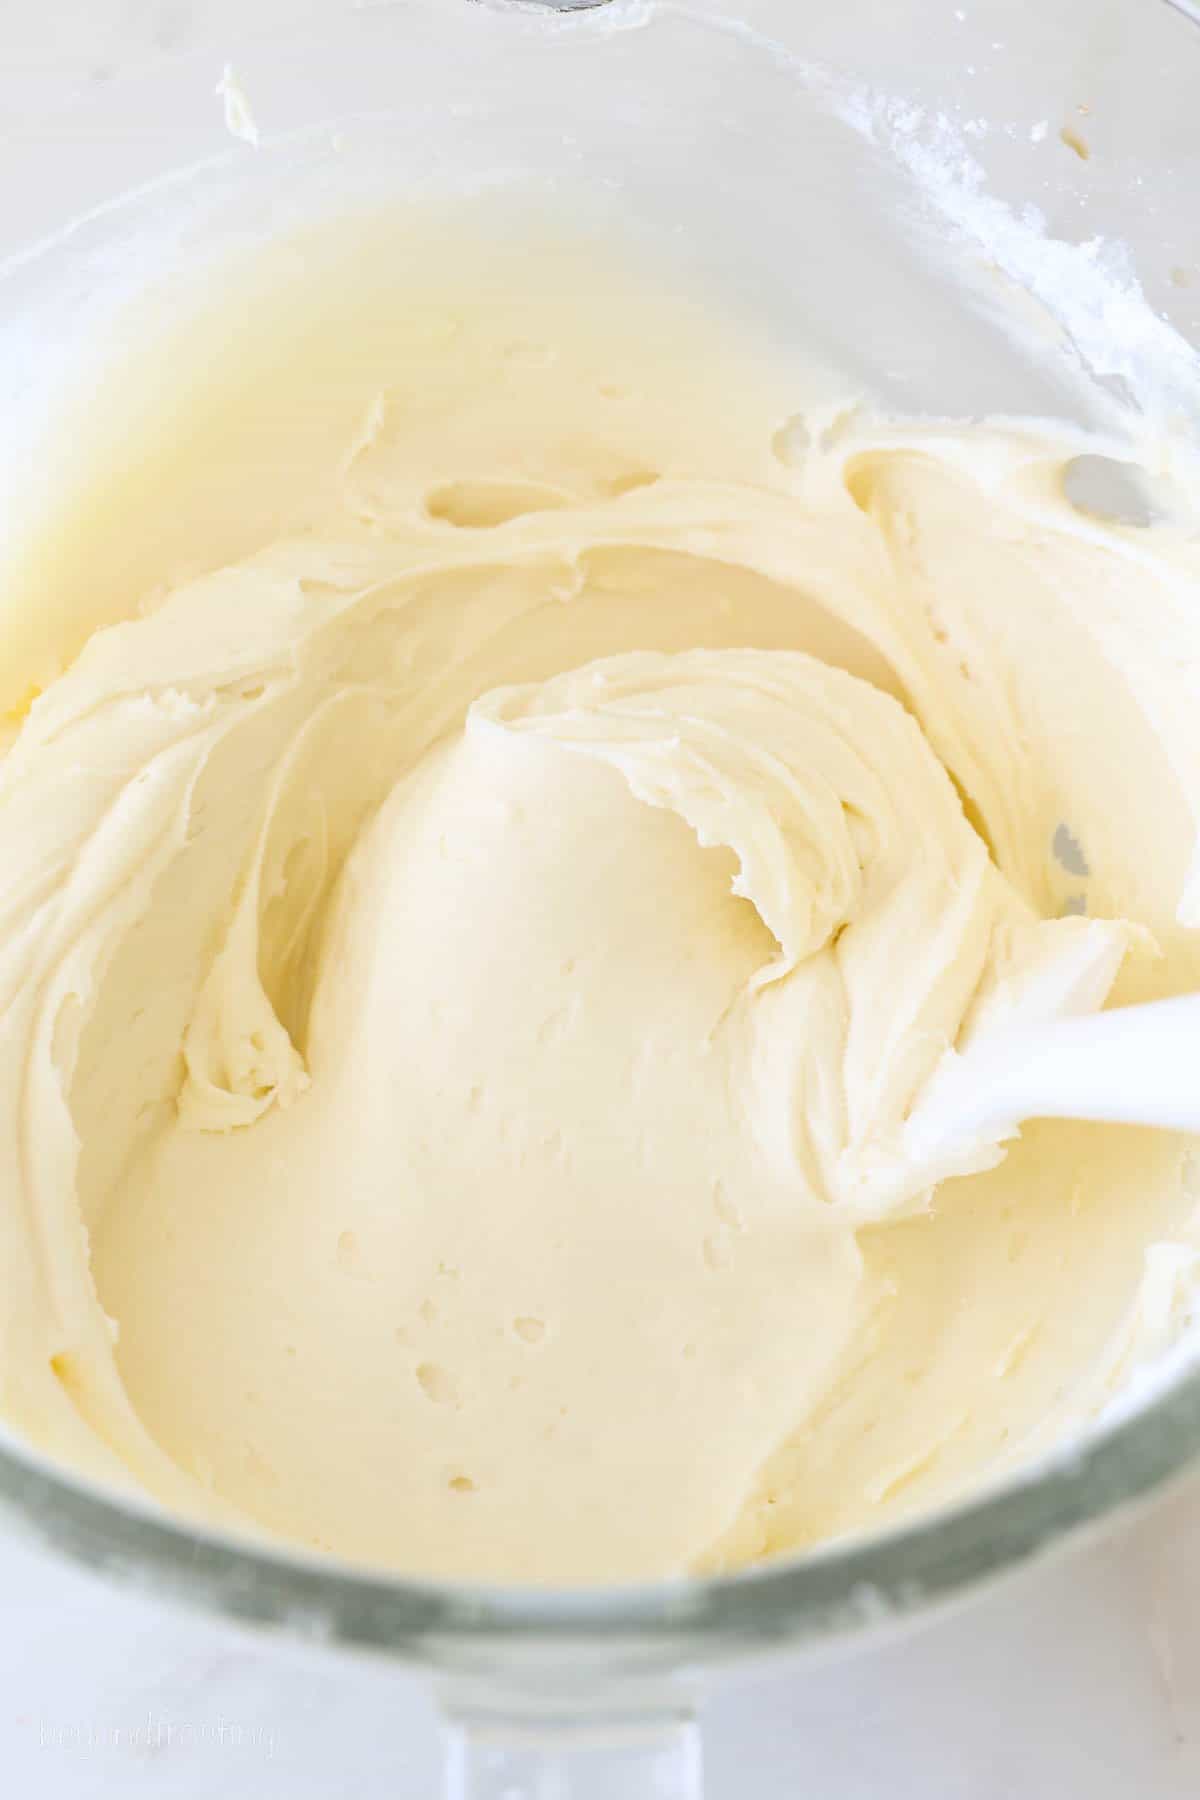 Cream cheese frosting in a bowl